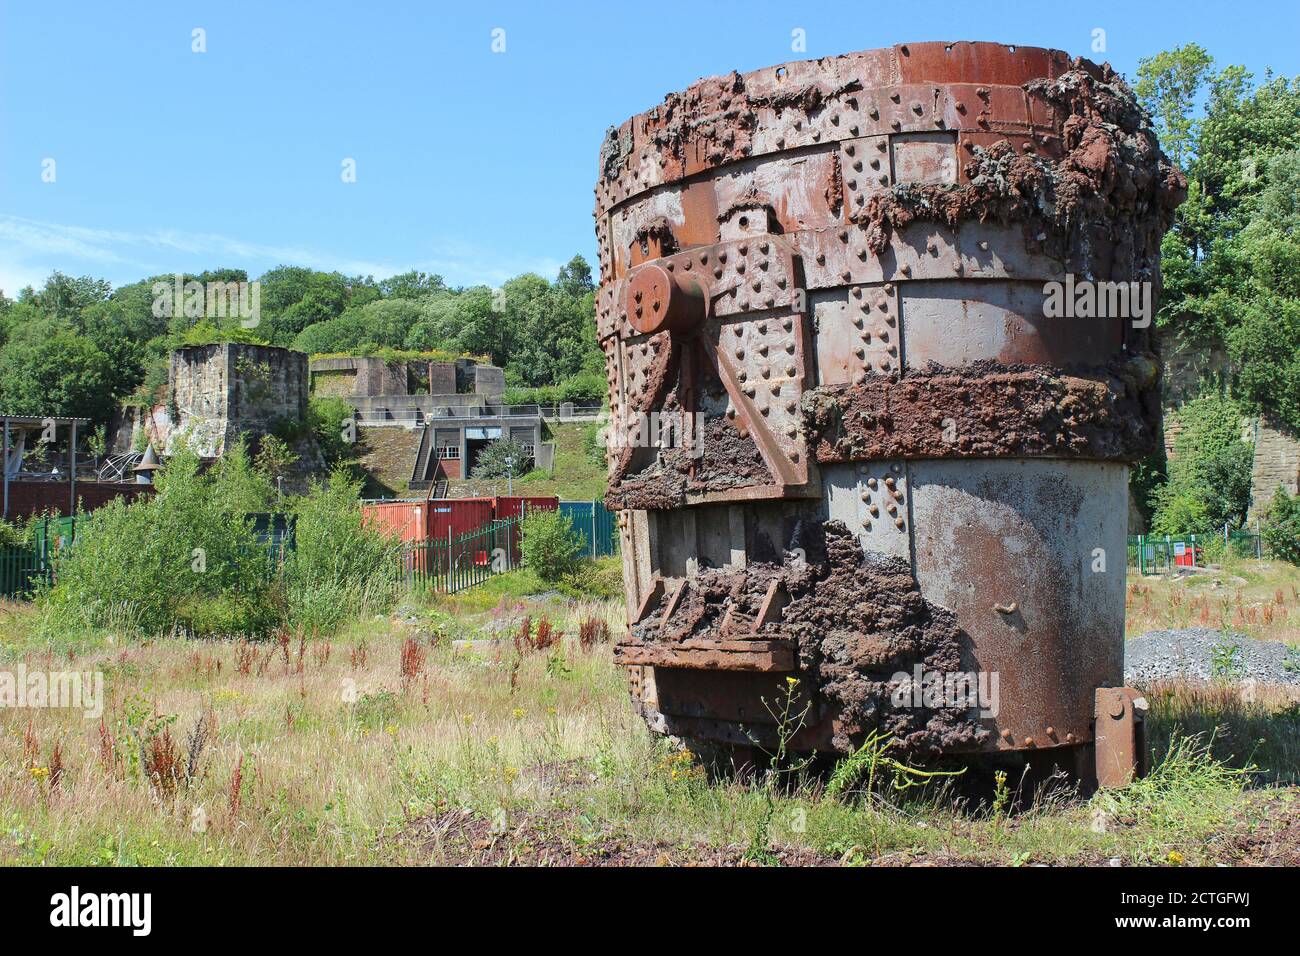 Steel Crucible presso l'ex Brymbo Steelworks (a.k.a. Brymbo Ironworks), Brymbo Village, Wrexham, Galles Foto Stock